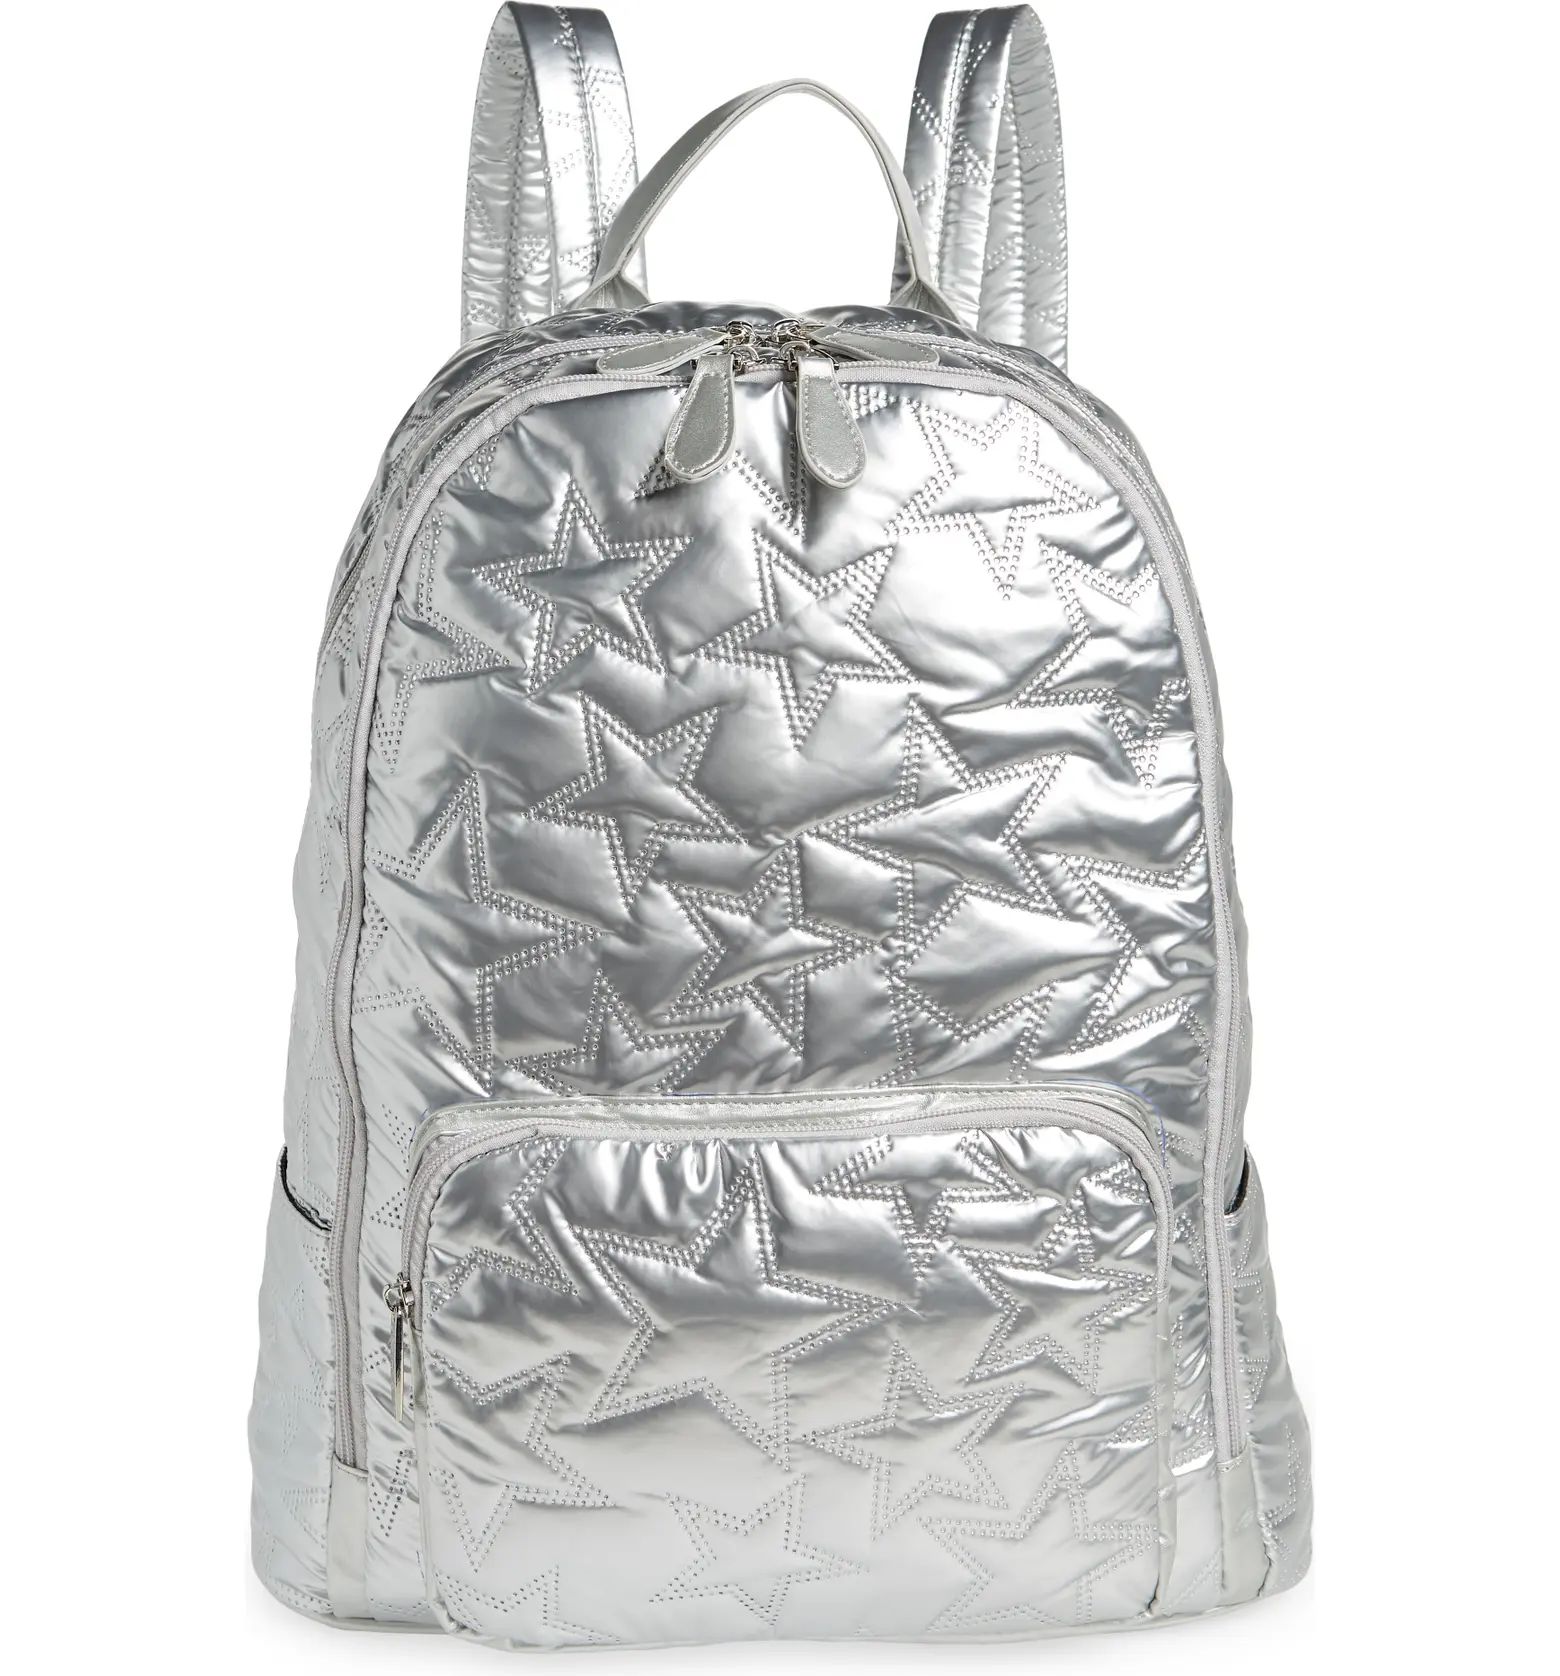 Bari Lynn Kids' Star Quilted Puffy Metallic Backpack | Nordstrom | Nordstrom